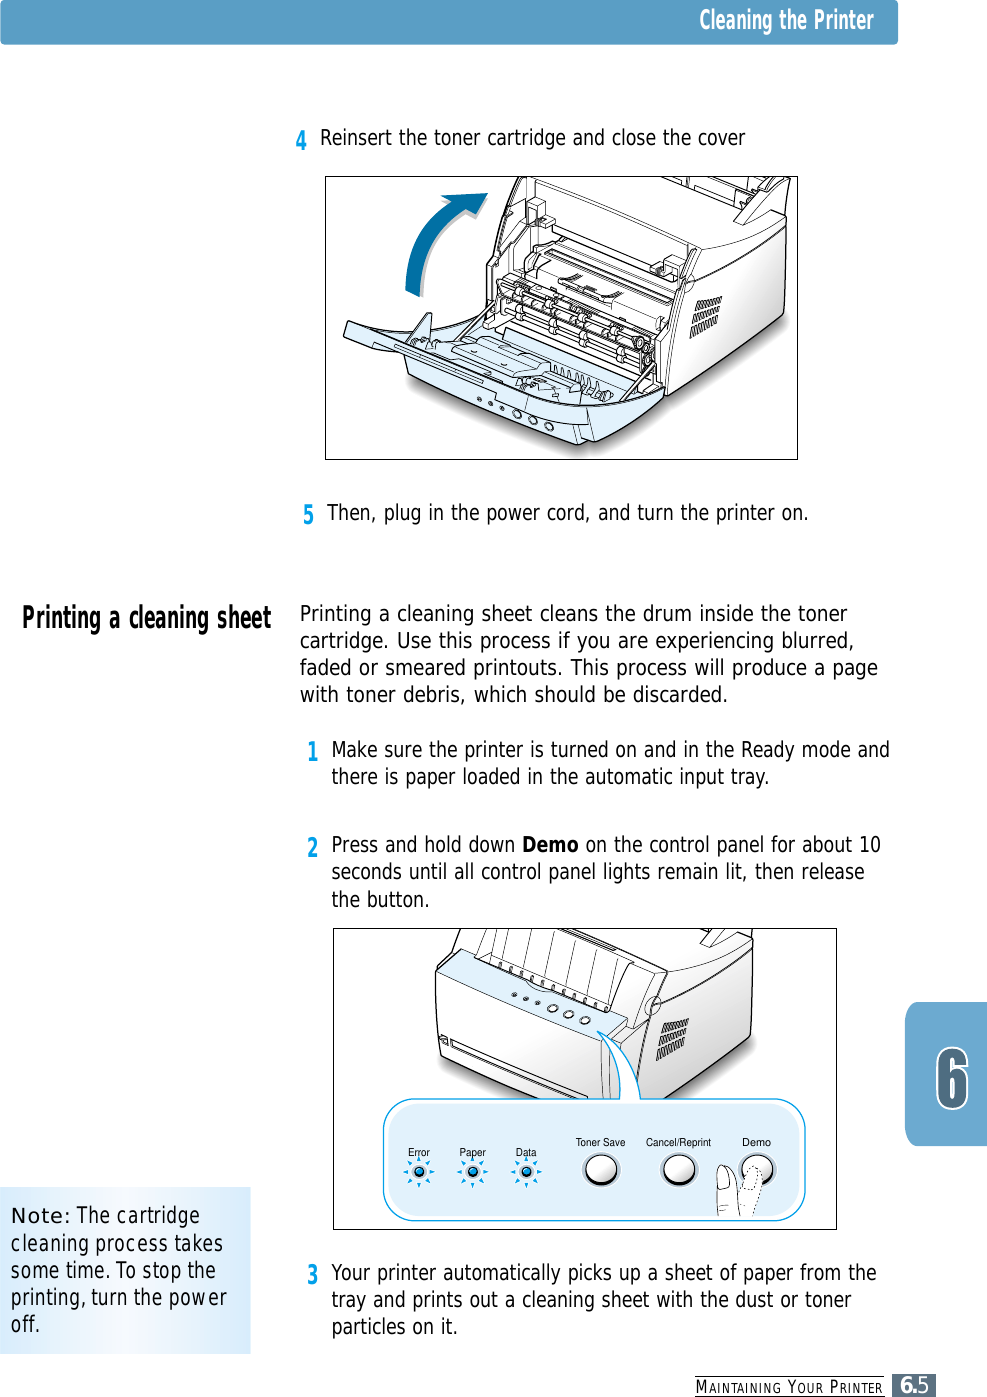 3Your printer automatically picks up a sheet of paper from thetray and prints out a cleaning sheet with the dust or tonerparticles on it.MAINTAINING YOUR PRINTER6.55Then, plug in the power cord, and turn the printer on.Note: The cartridgecleaning process takessome time. To stop theprinting, turn the poweroff.Cleaning the PrinterPrinting a cleaning sheet Printing a cleaning sheet cleans the drum inside the tonercartridge. Use this process if you are experiencing blurred,faded or smeared printouts. This process will produce a pagewith toner debris, which should be discarded.1Make sure the printer is turned on and in the Ready mode andthere is paper loaded in the automatic input tray.2Press and hold down Demo on the control panel for about 10seconds until all control panel lights remain lit, then releasethe button.4Reinsert the toner cartridge and close the coverToner Save Cancel/ReprintDemoDataPaperError